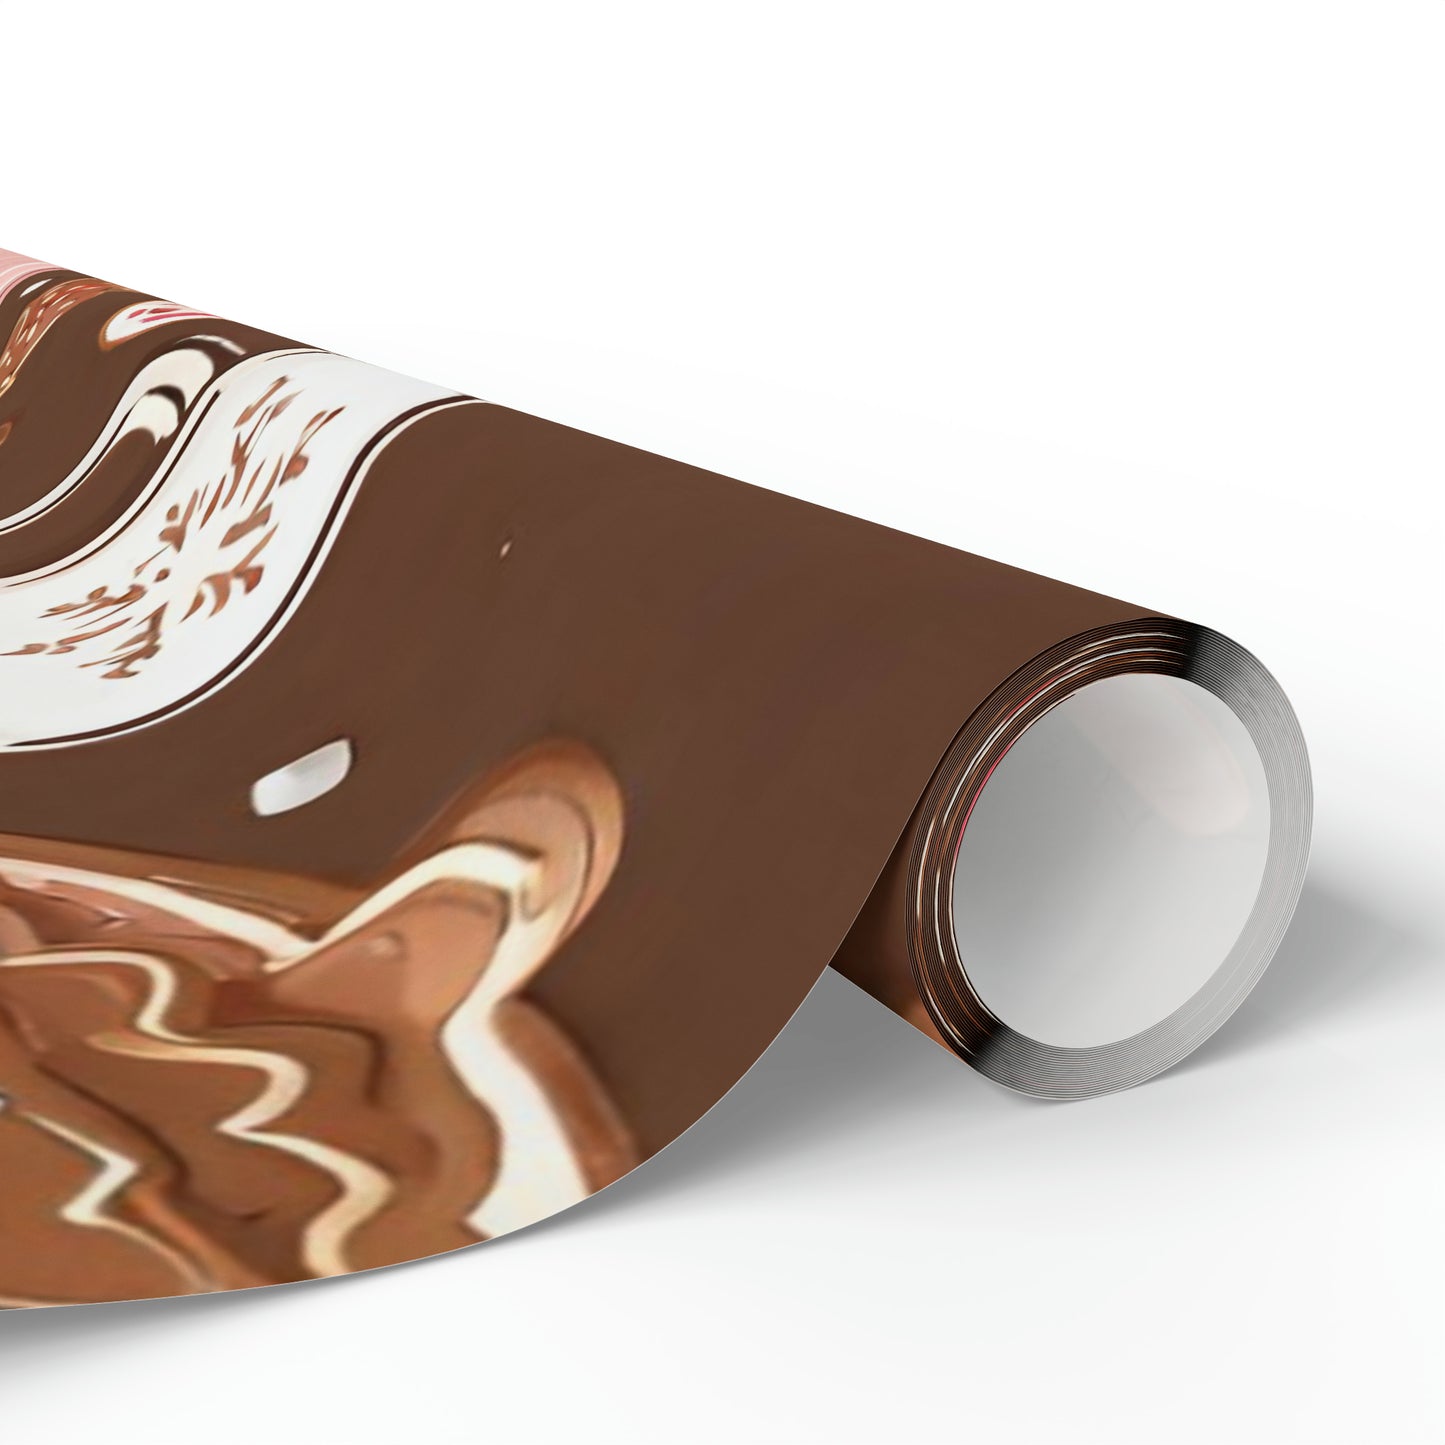 Wrapping Papers Hot Chocolate